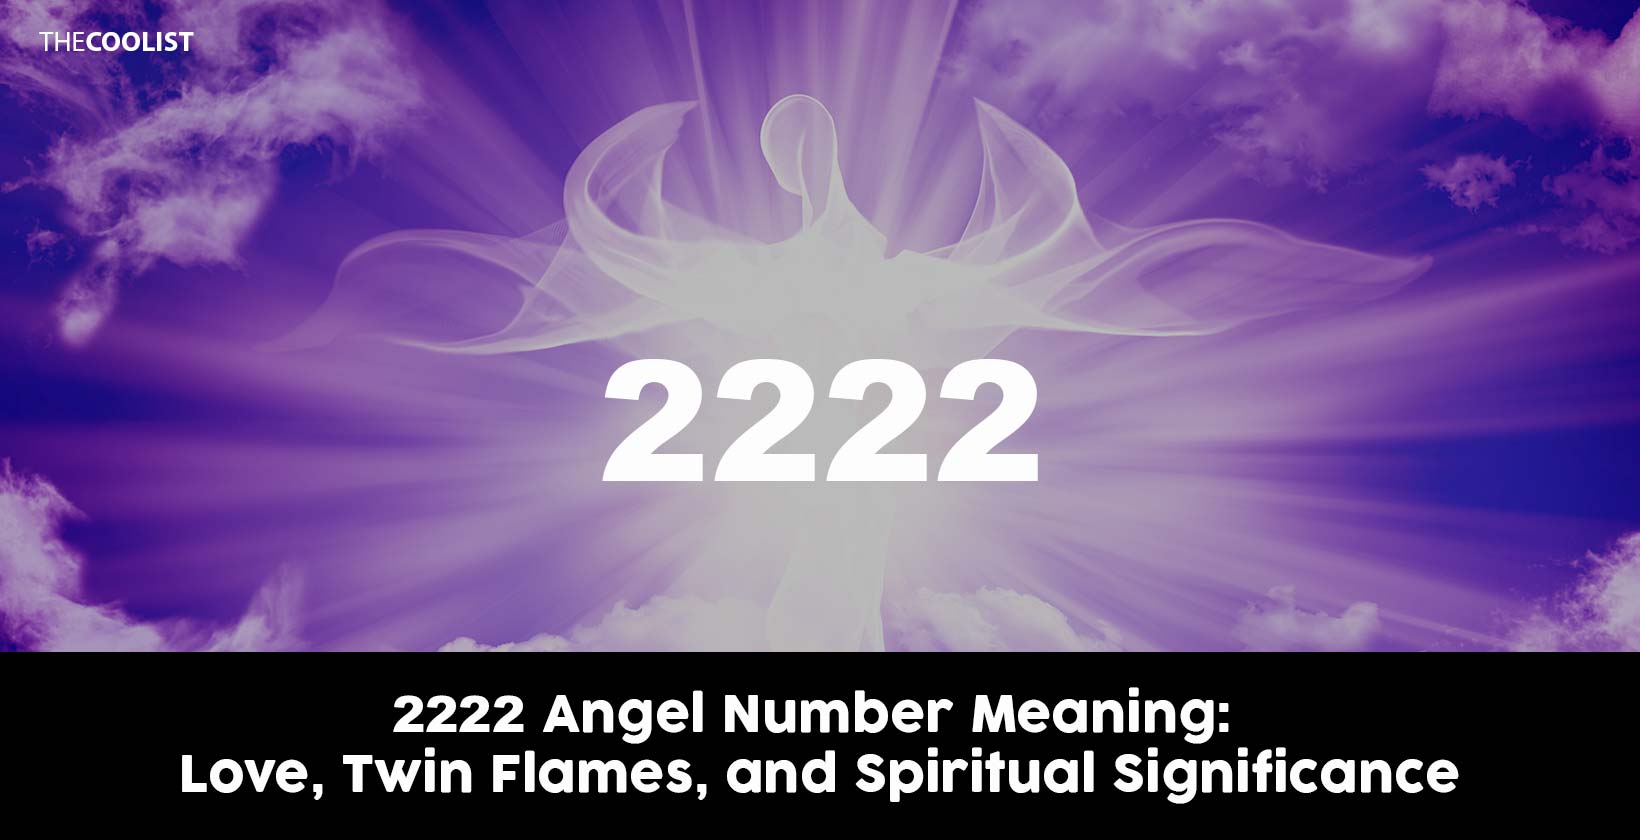 2222 Angel Number Meaning: For Love, Twin Flames, and Spiritual Significance